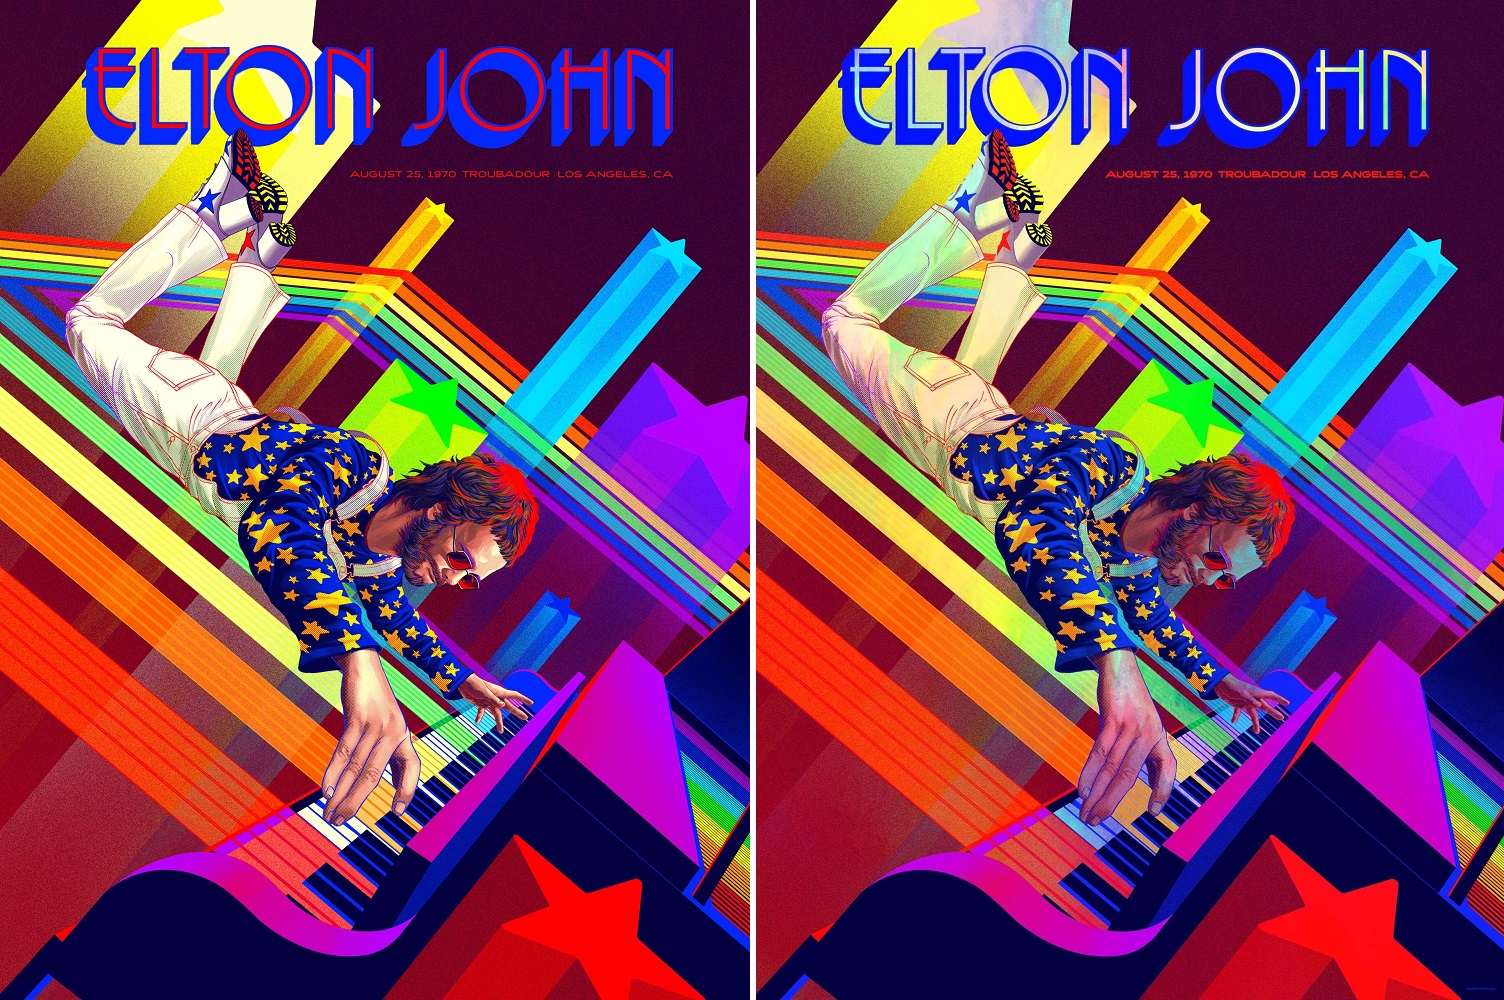 The Blot Says Elton John Troubadour 50th Anniversary Concert Poster By Kevin Tong X Collectionzz